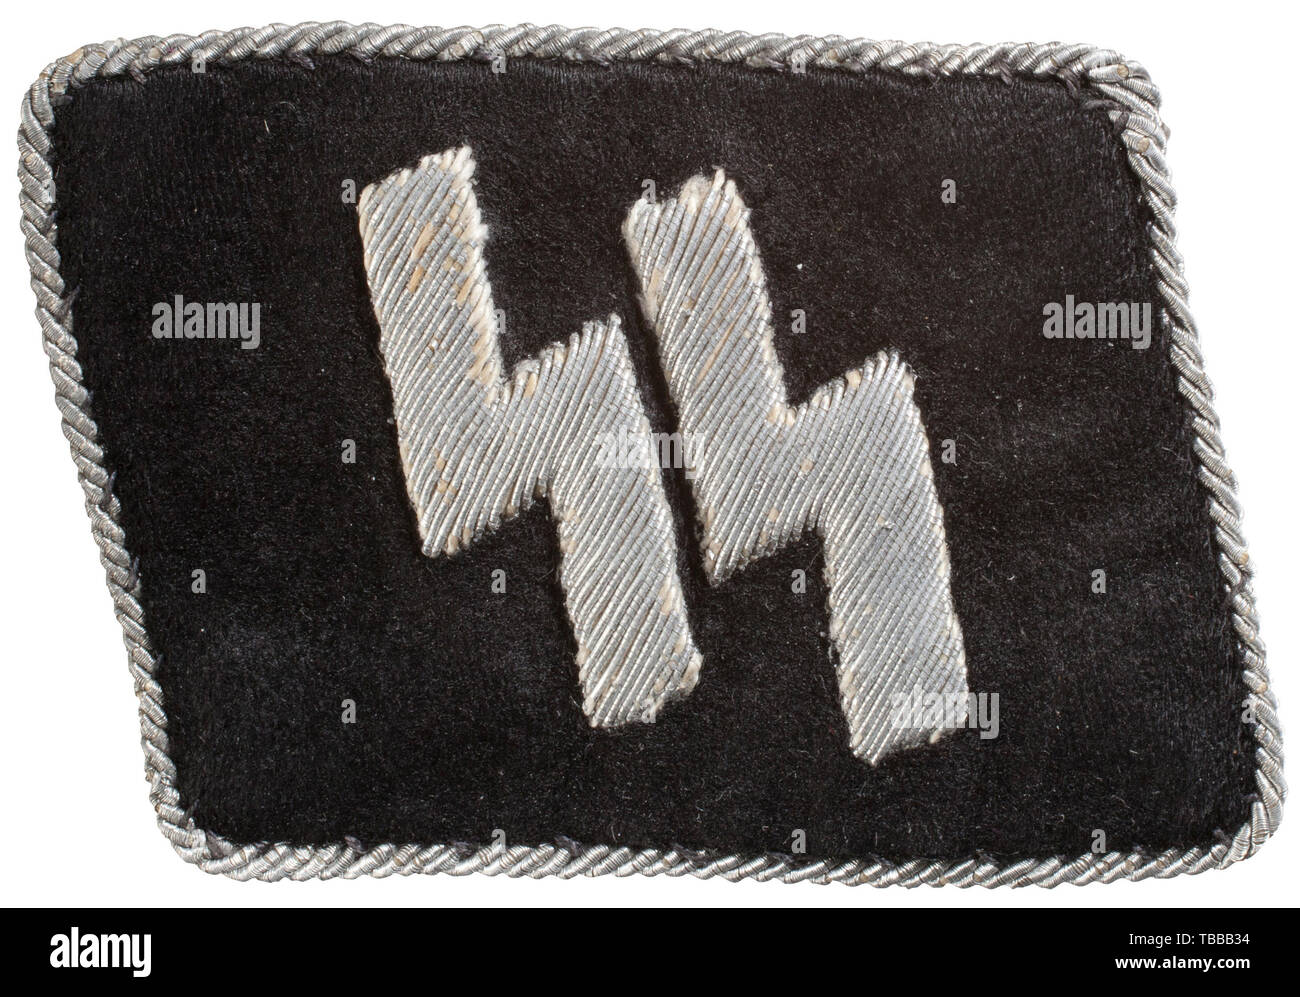 THE JOHN PEPERA COLLECTION, A Collar Patch for SS Officer, Black wool over buckram with embroidered silver/aluminium wire and twisted silver/aluminium wire piping., Editorial-Use-Only Stock Photo